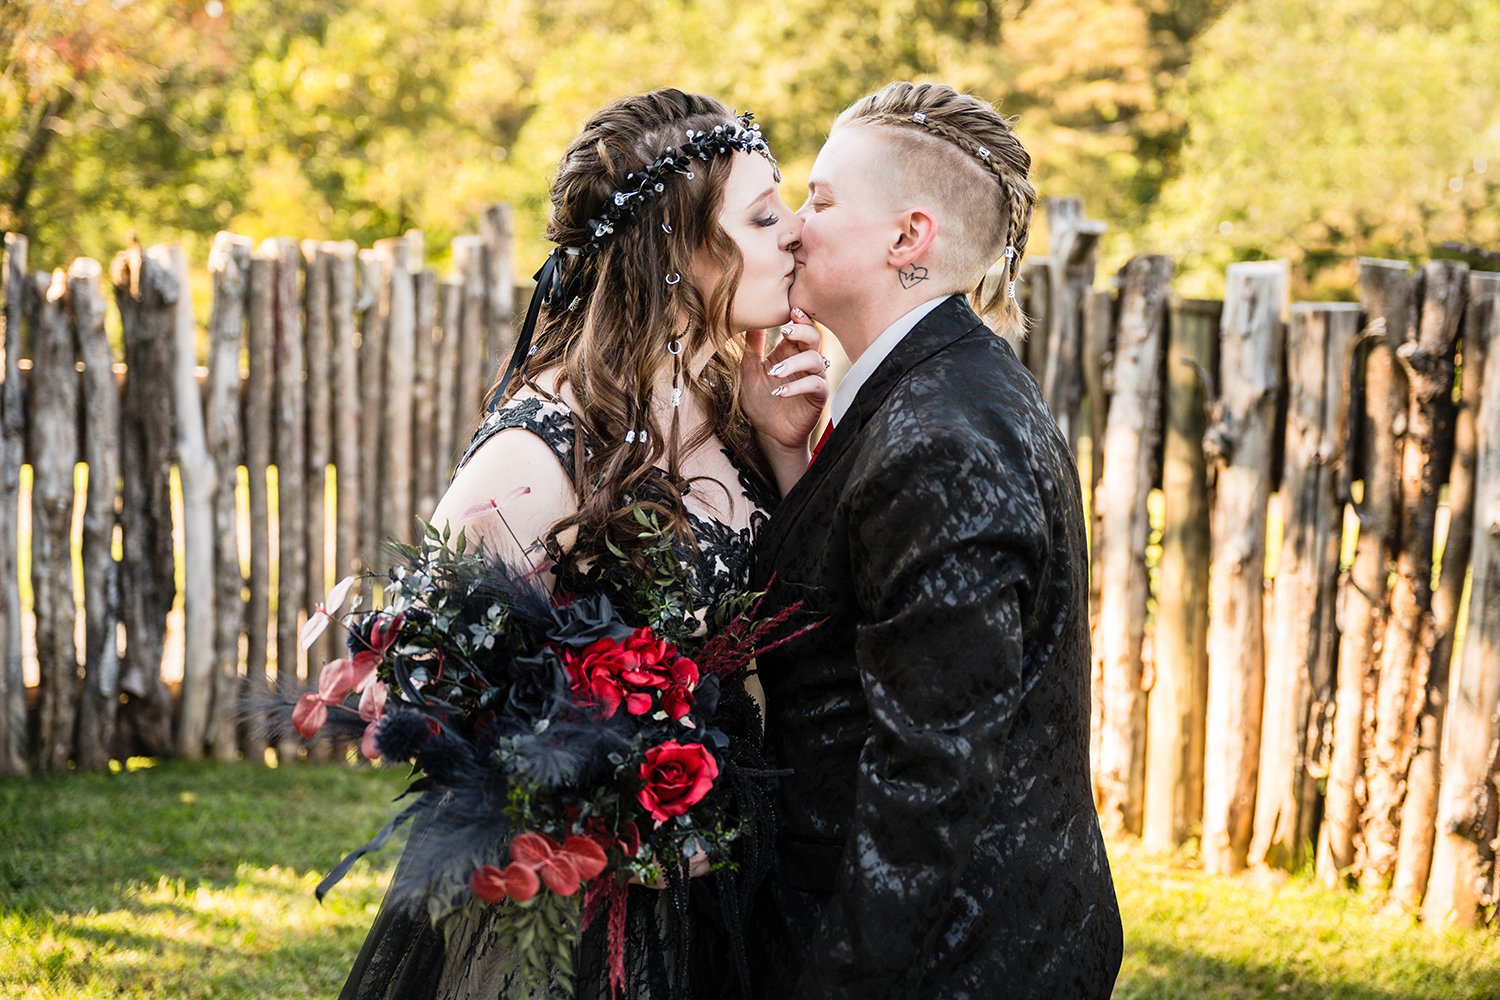 An LGBTQ+ wedding couple kiss after their first look reveal in the yard of a Roanoke Airbnb on their elopement day in Virginia.